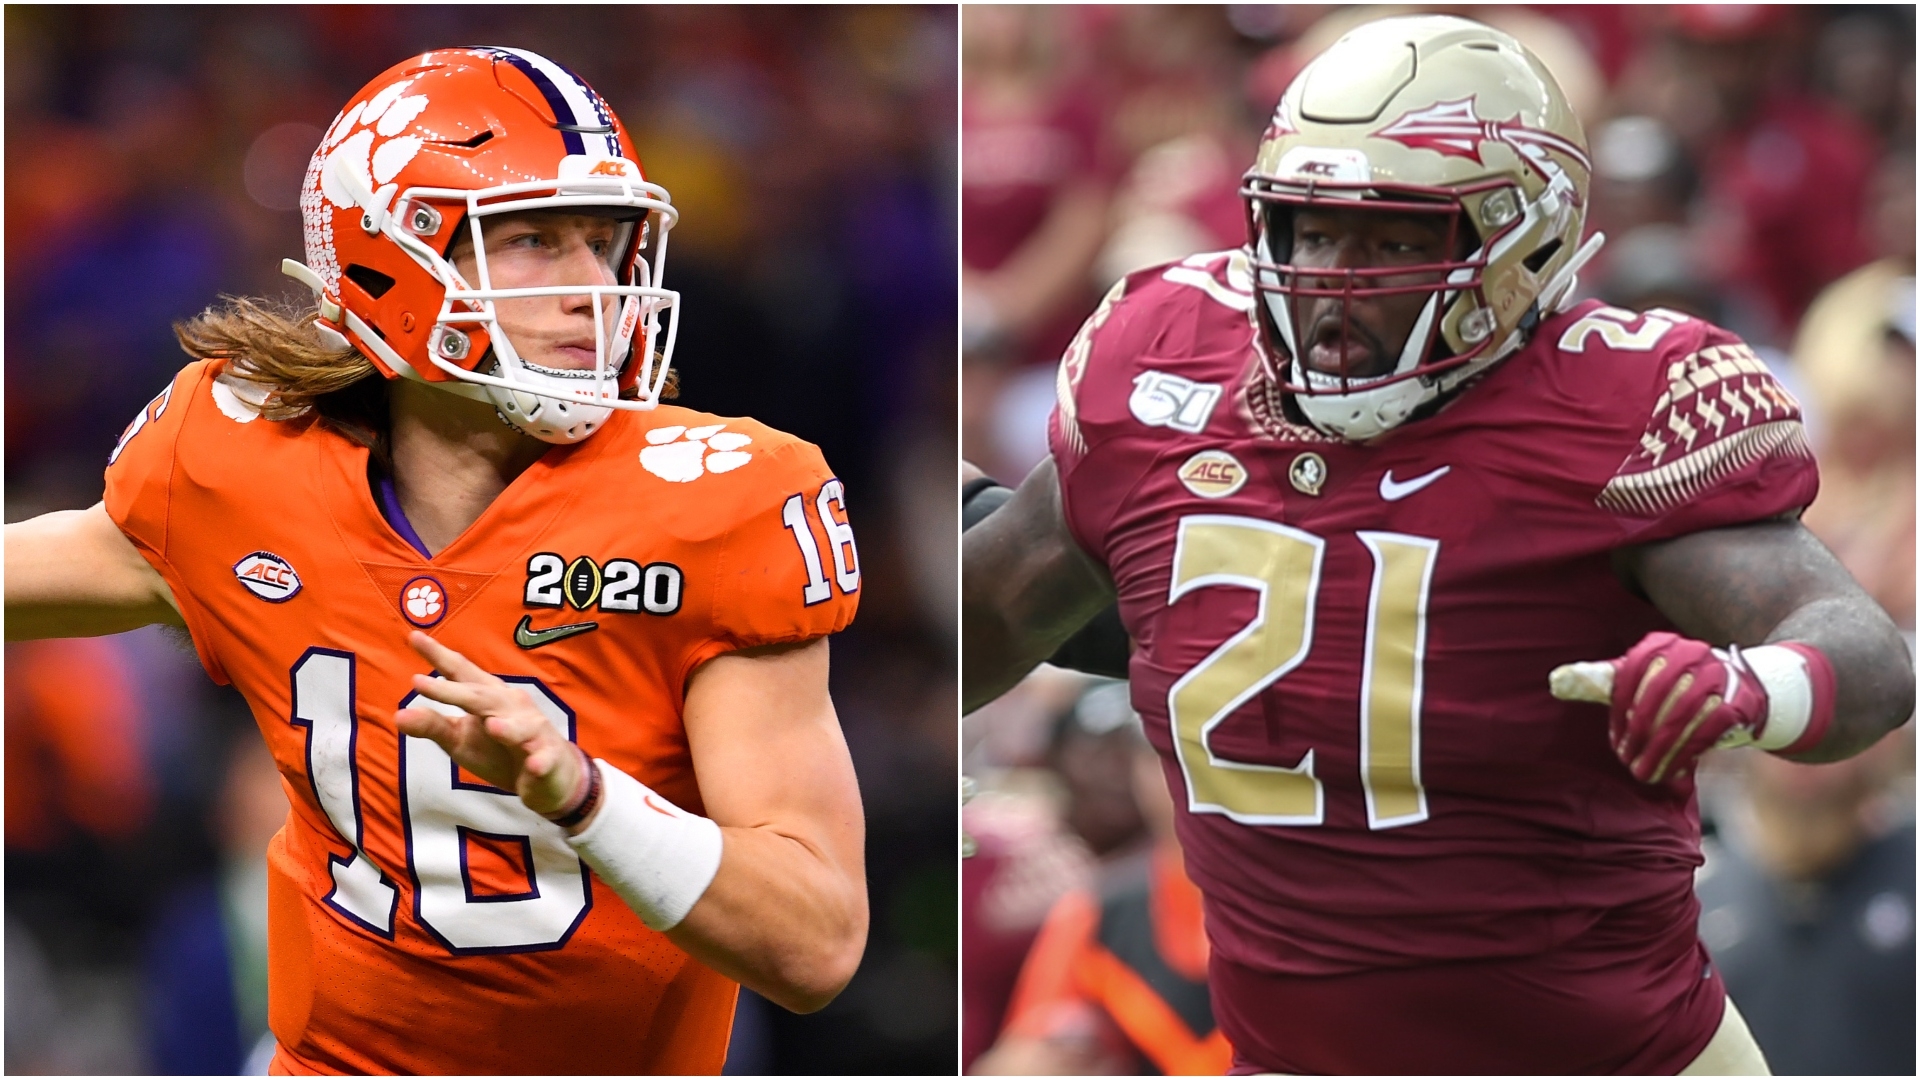 The top players going into the 2020 college football season Watch ESPN